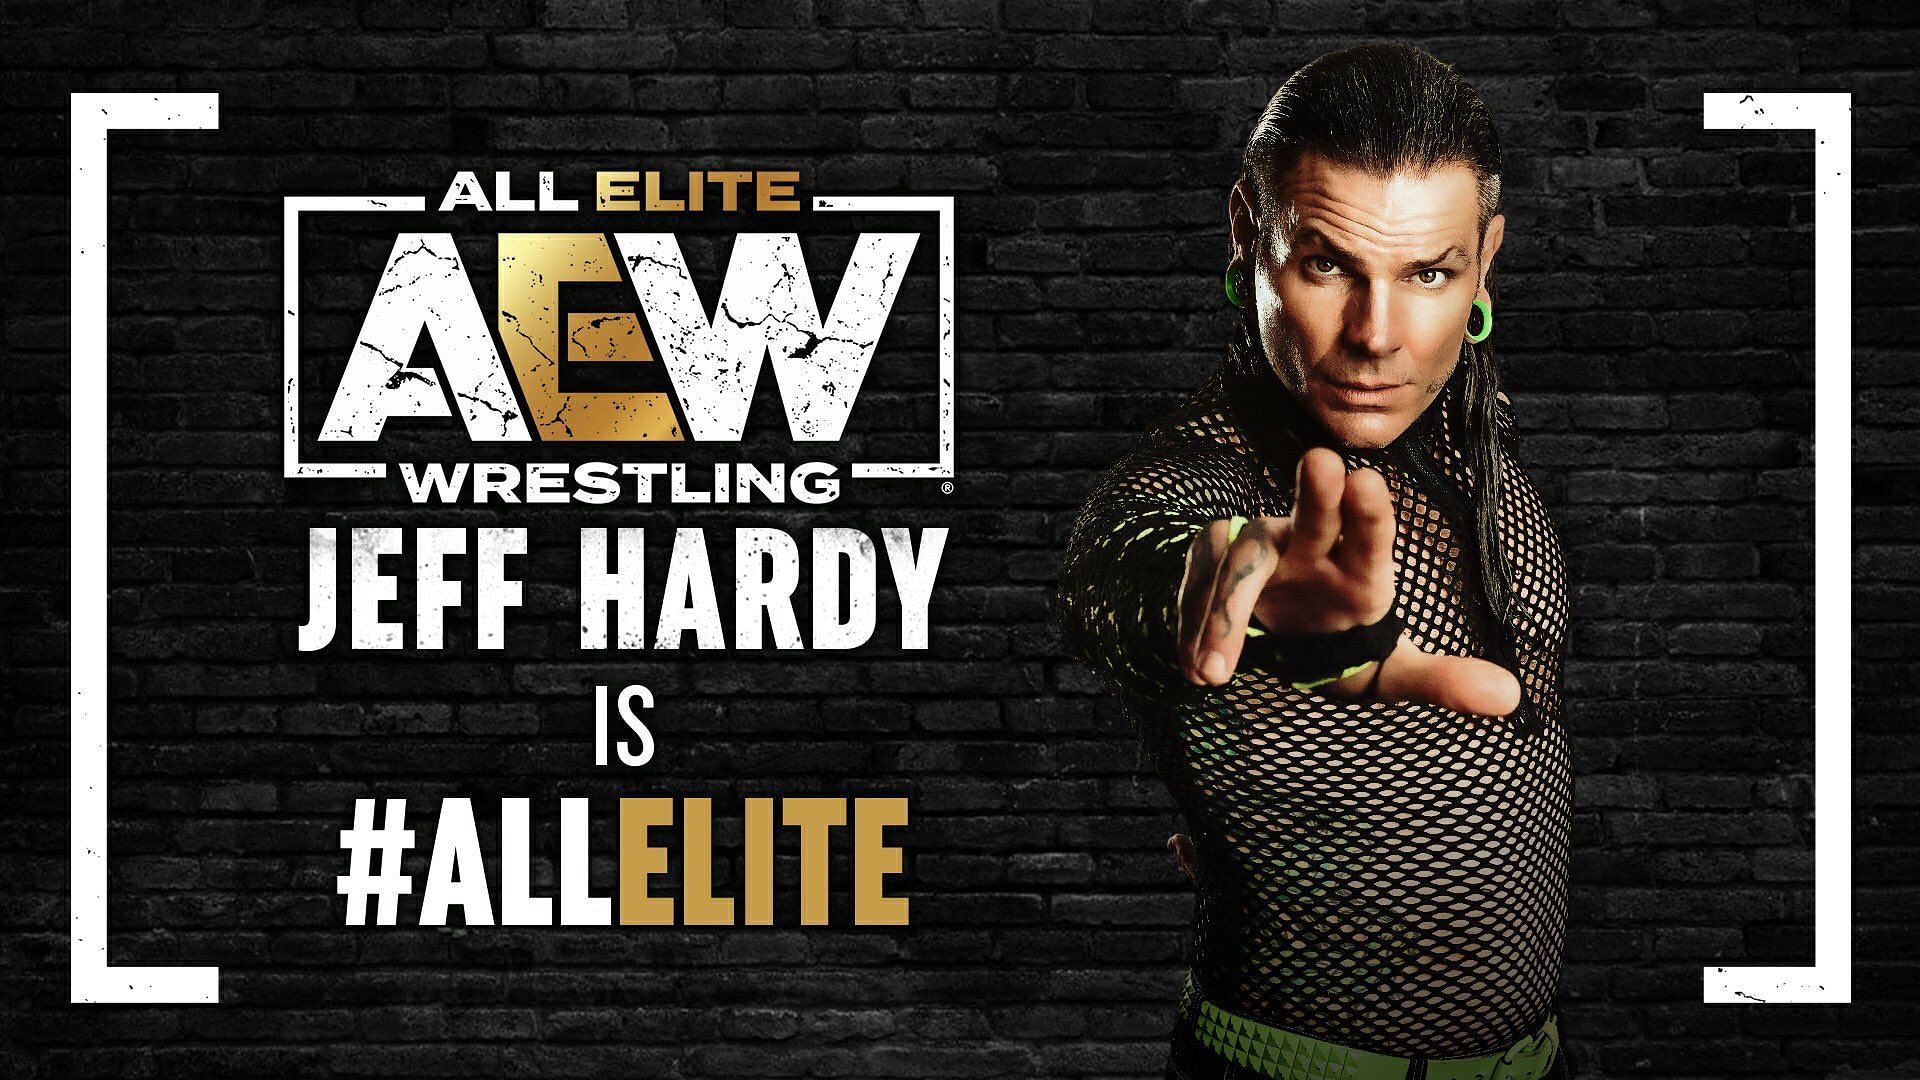 Jeff Hardy made his AEW debut on Dynamite